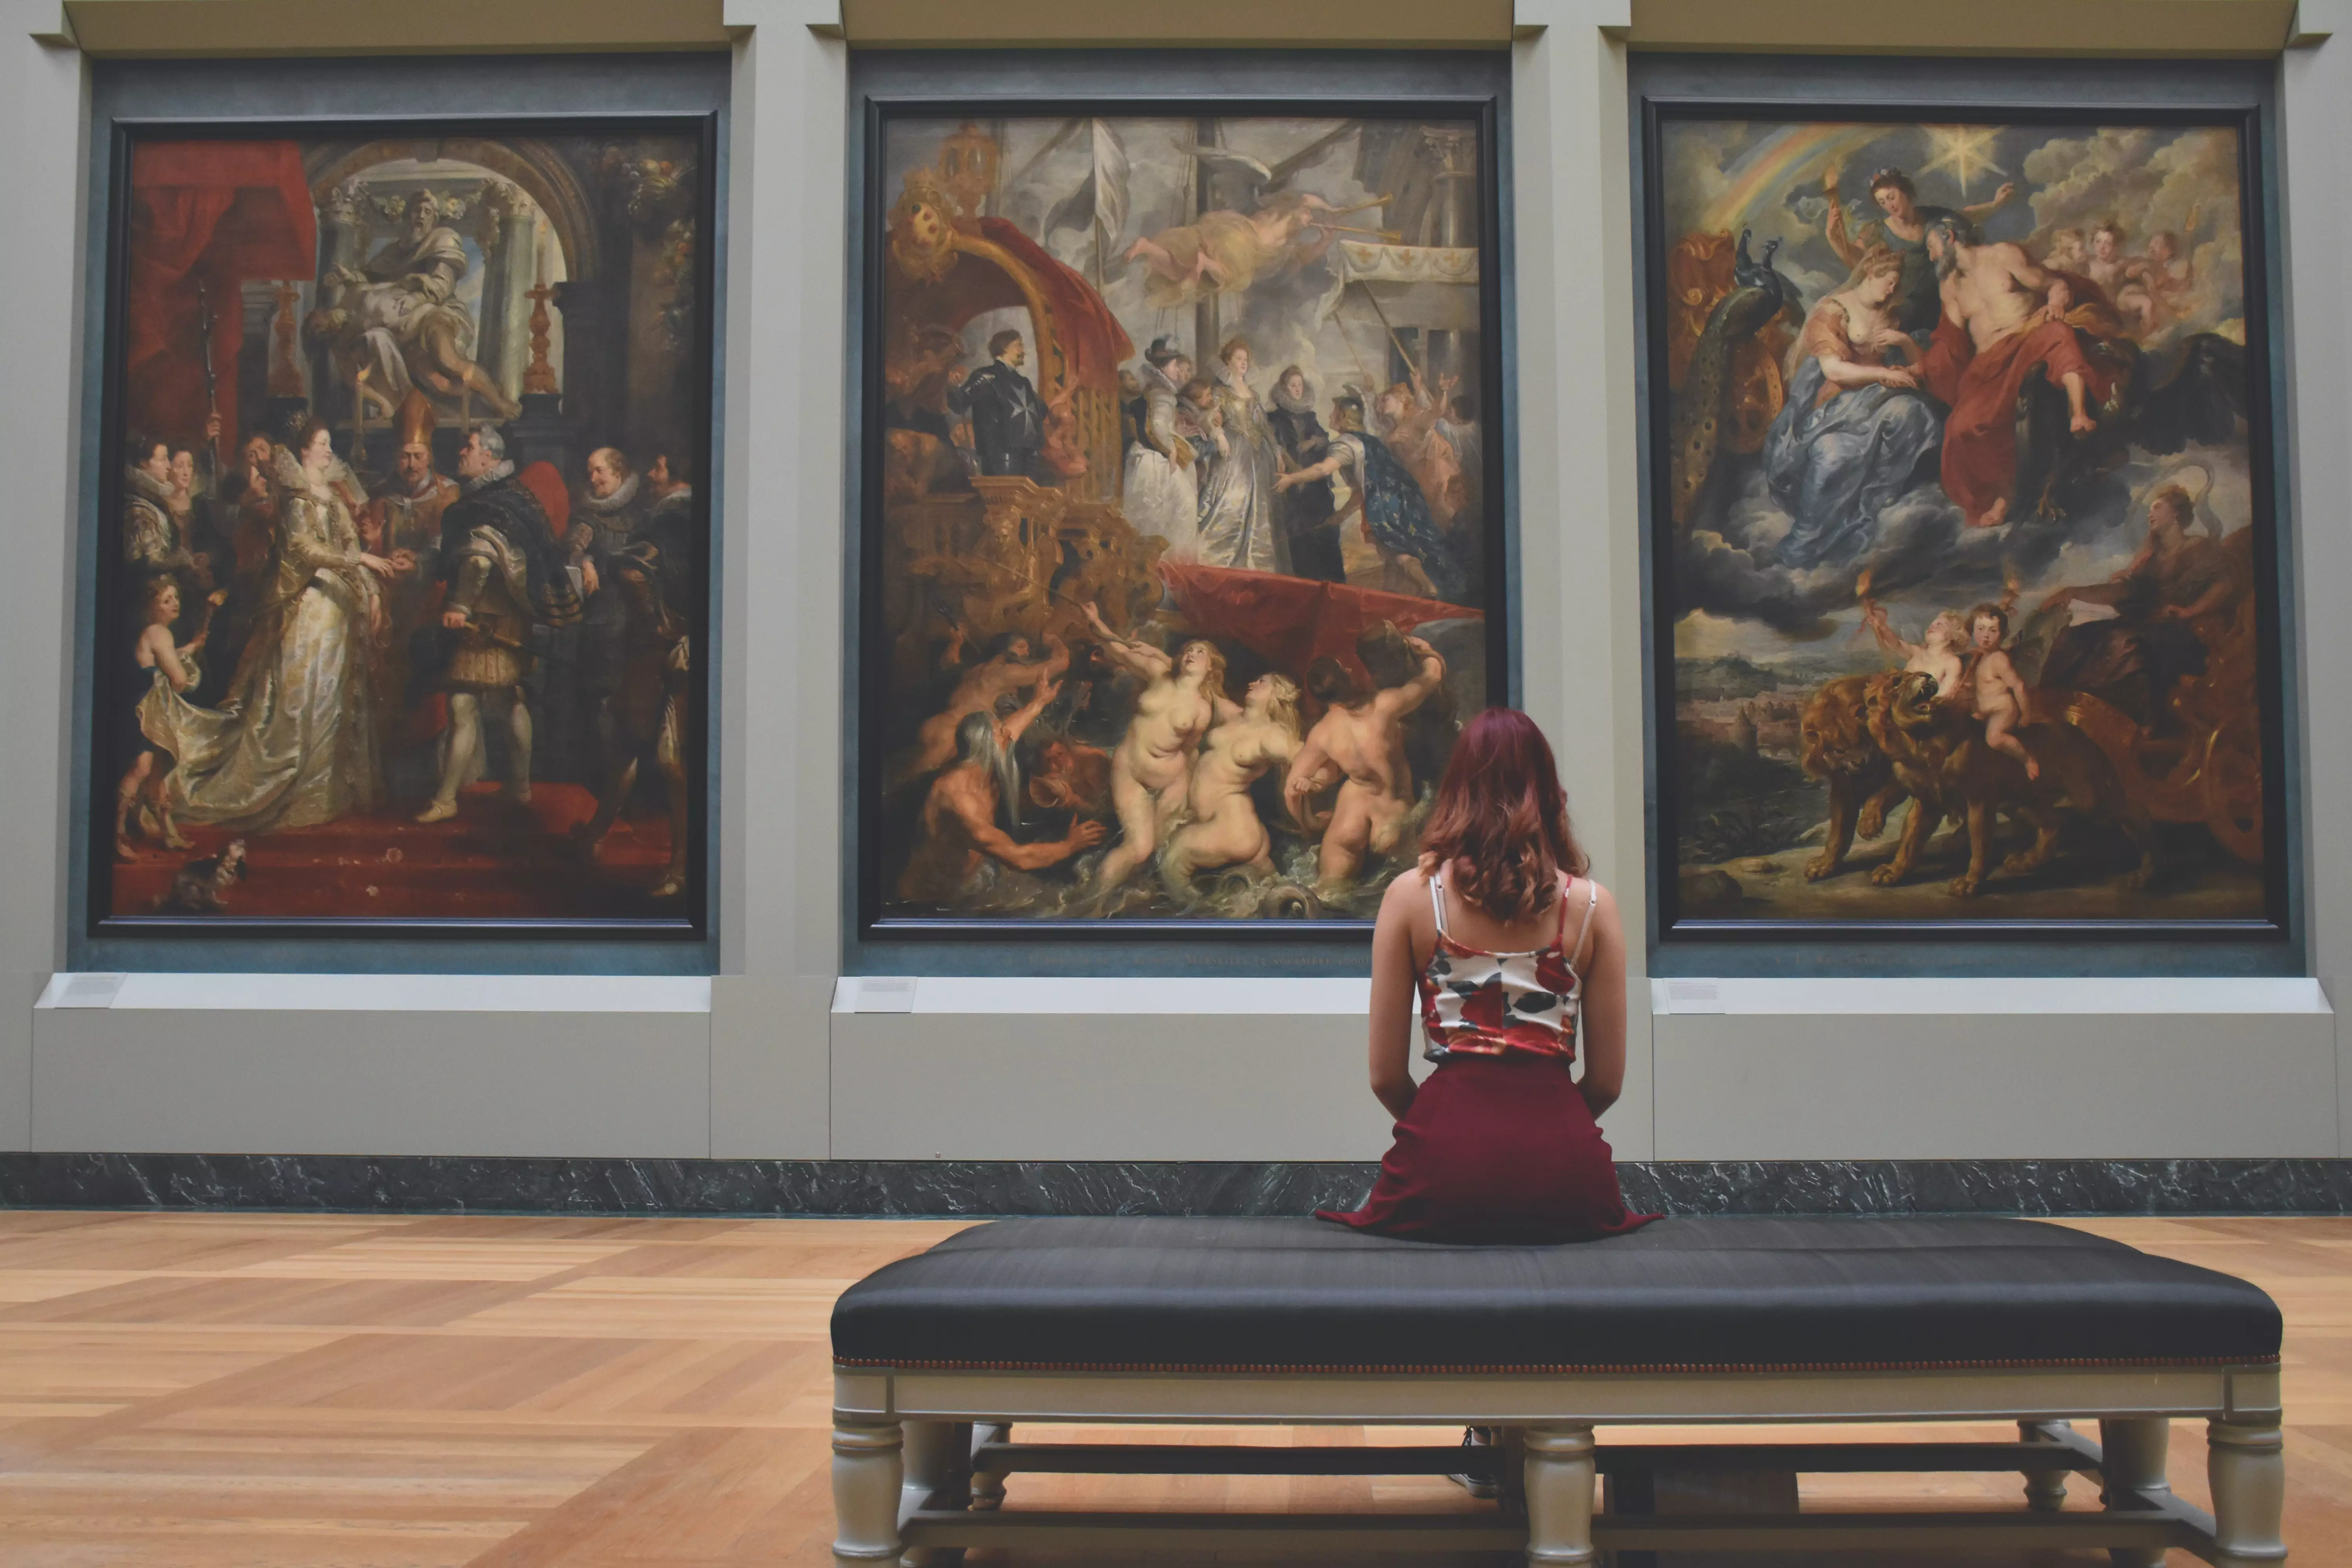 APPRECIATING ART AS A BOTH A SHARED AND SUBJECTIVE EXPERIENCE